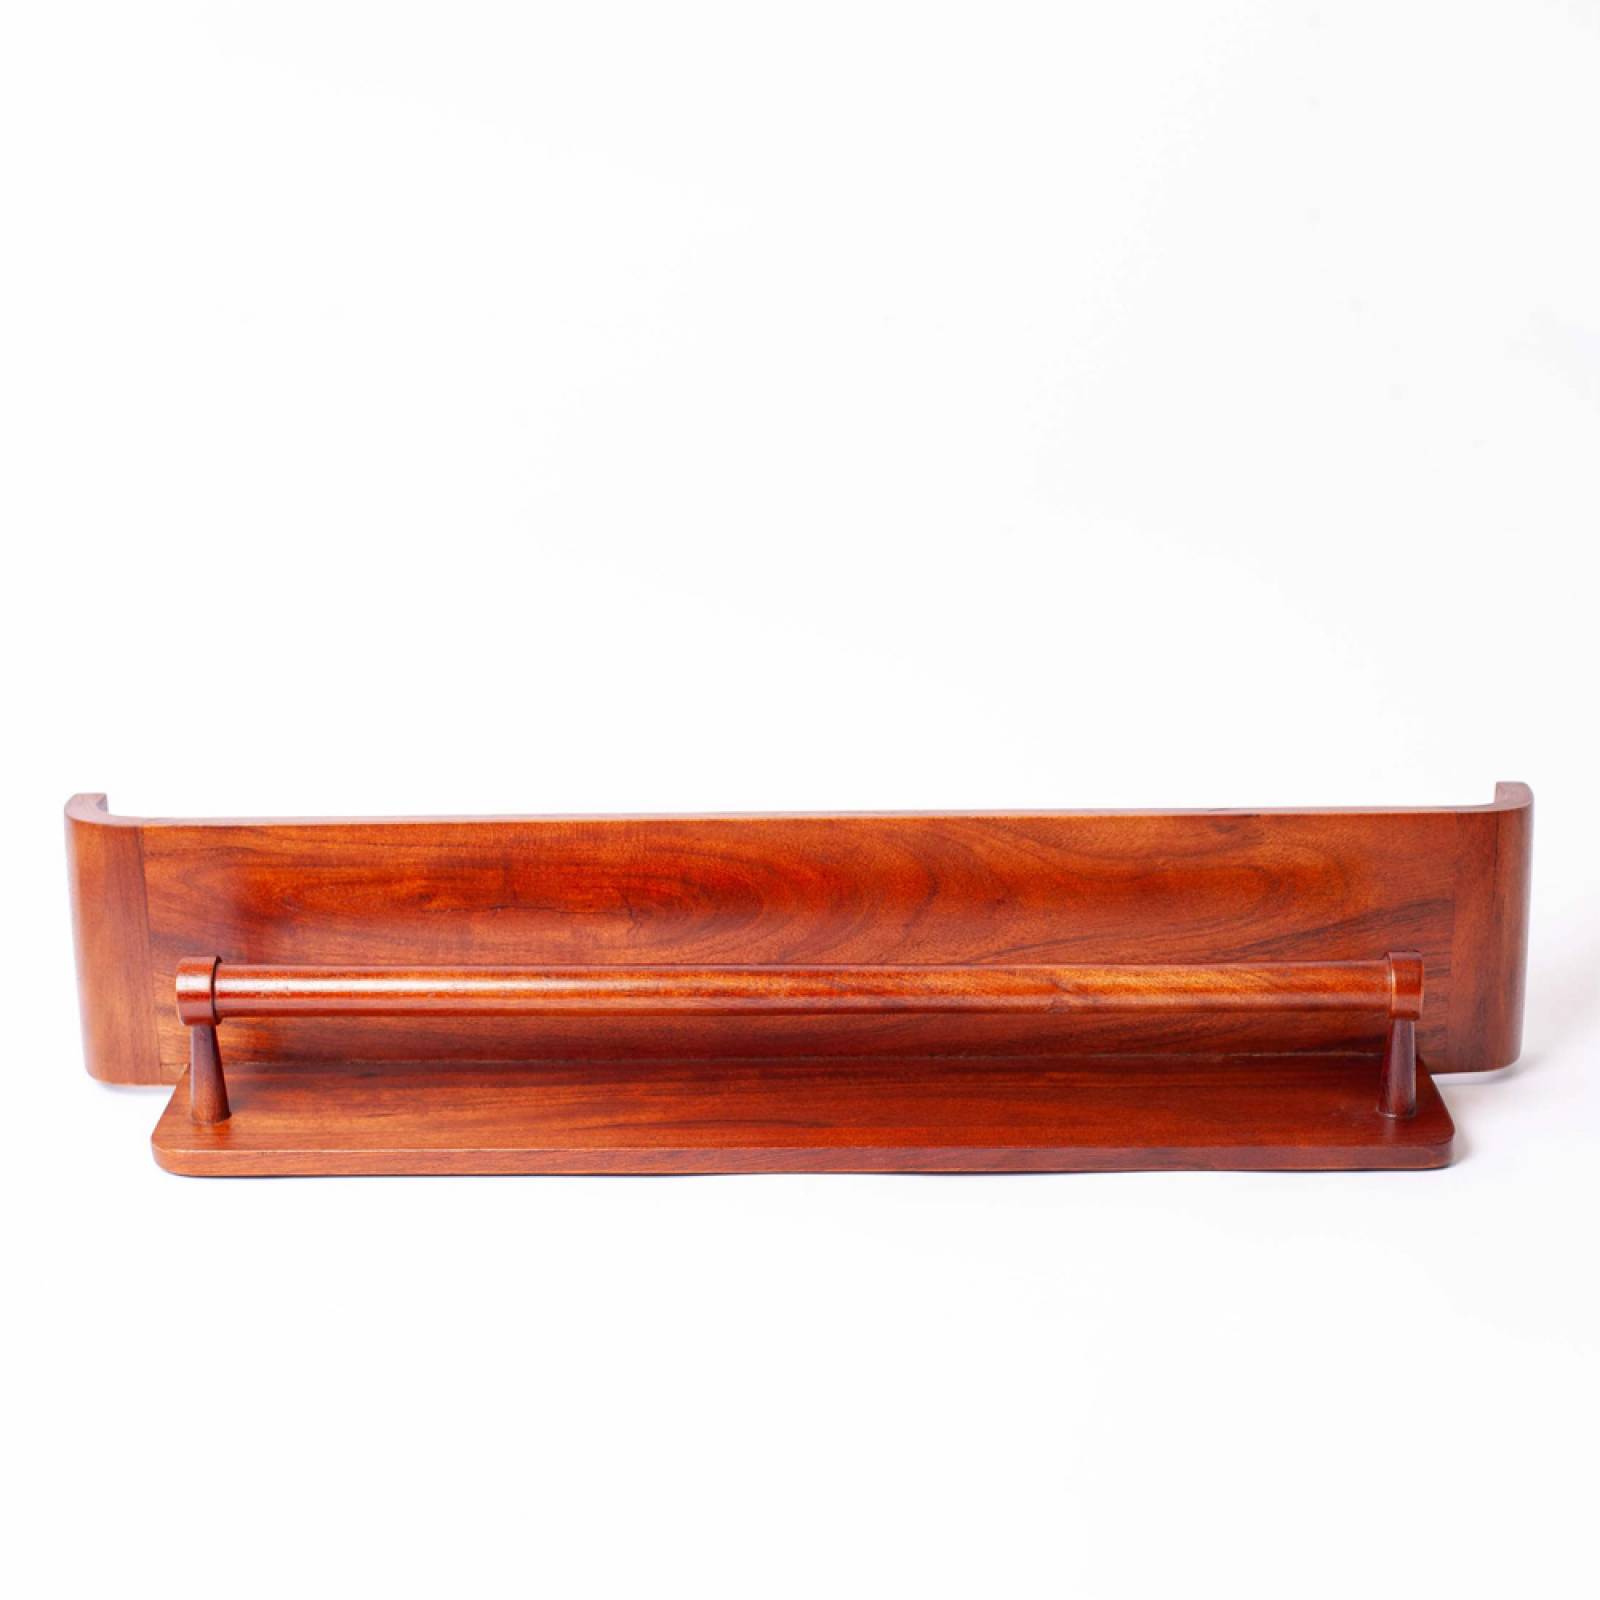 Wooden Mid Century Style Wall Shelf With Rail thumbnails